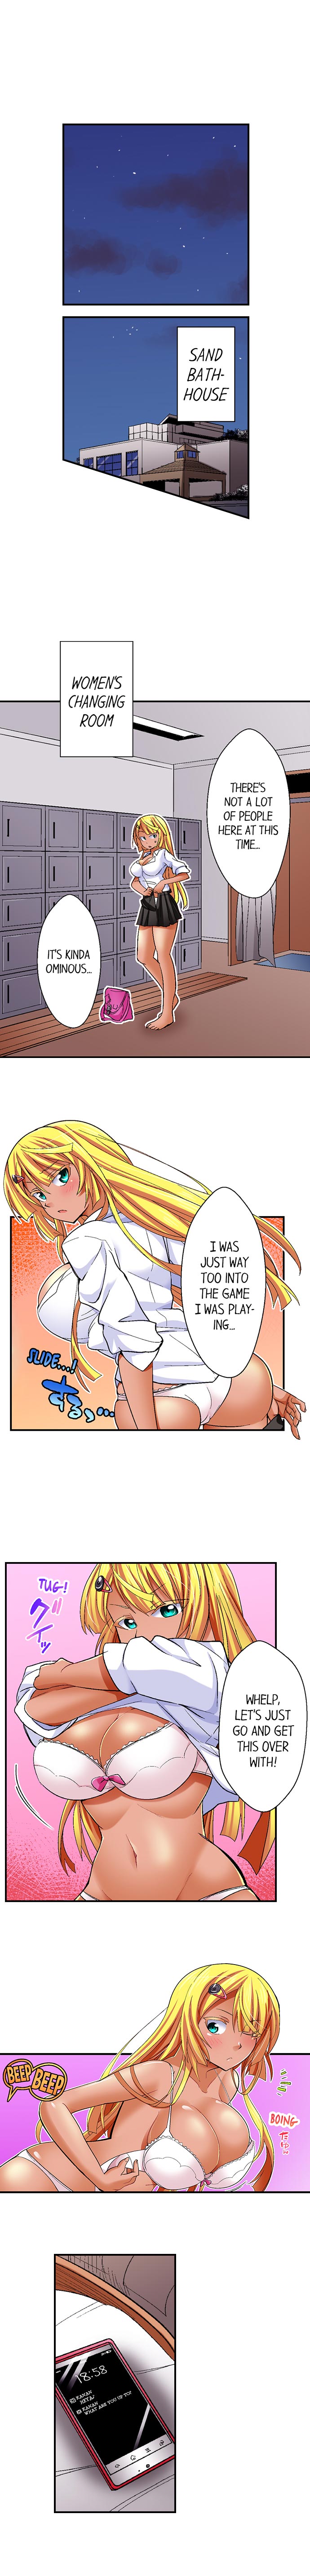 Sex With a Tanned Girl in a Bathhouse - Chapter 1 Page 7